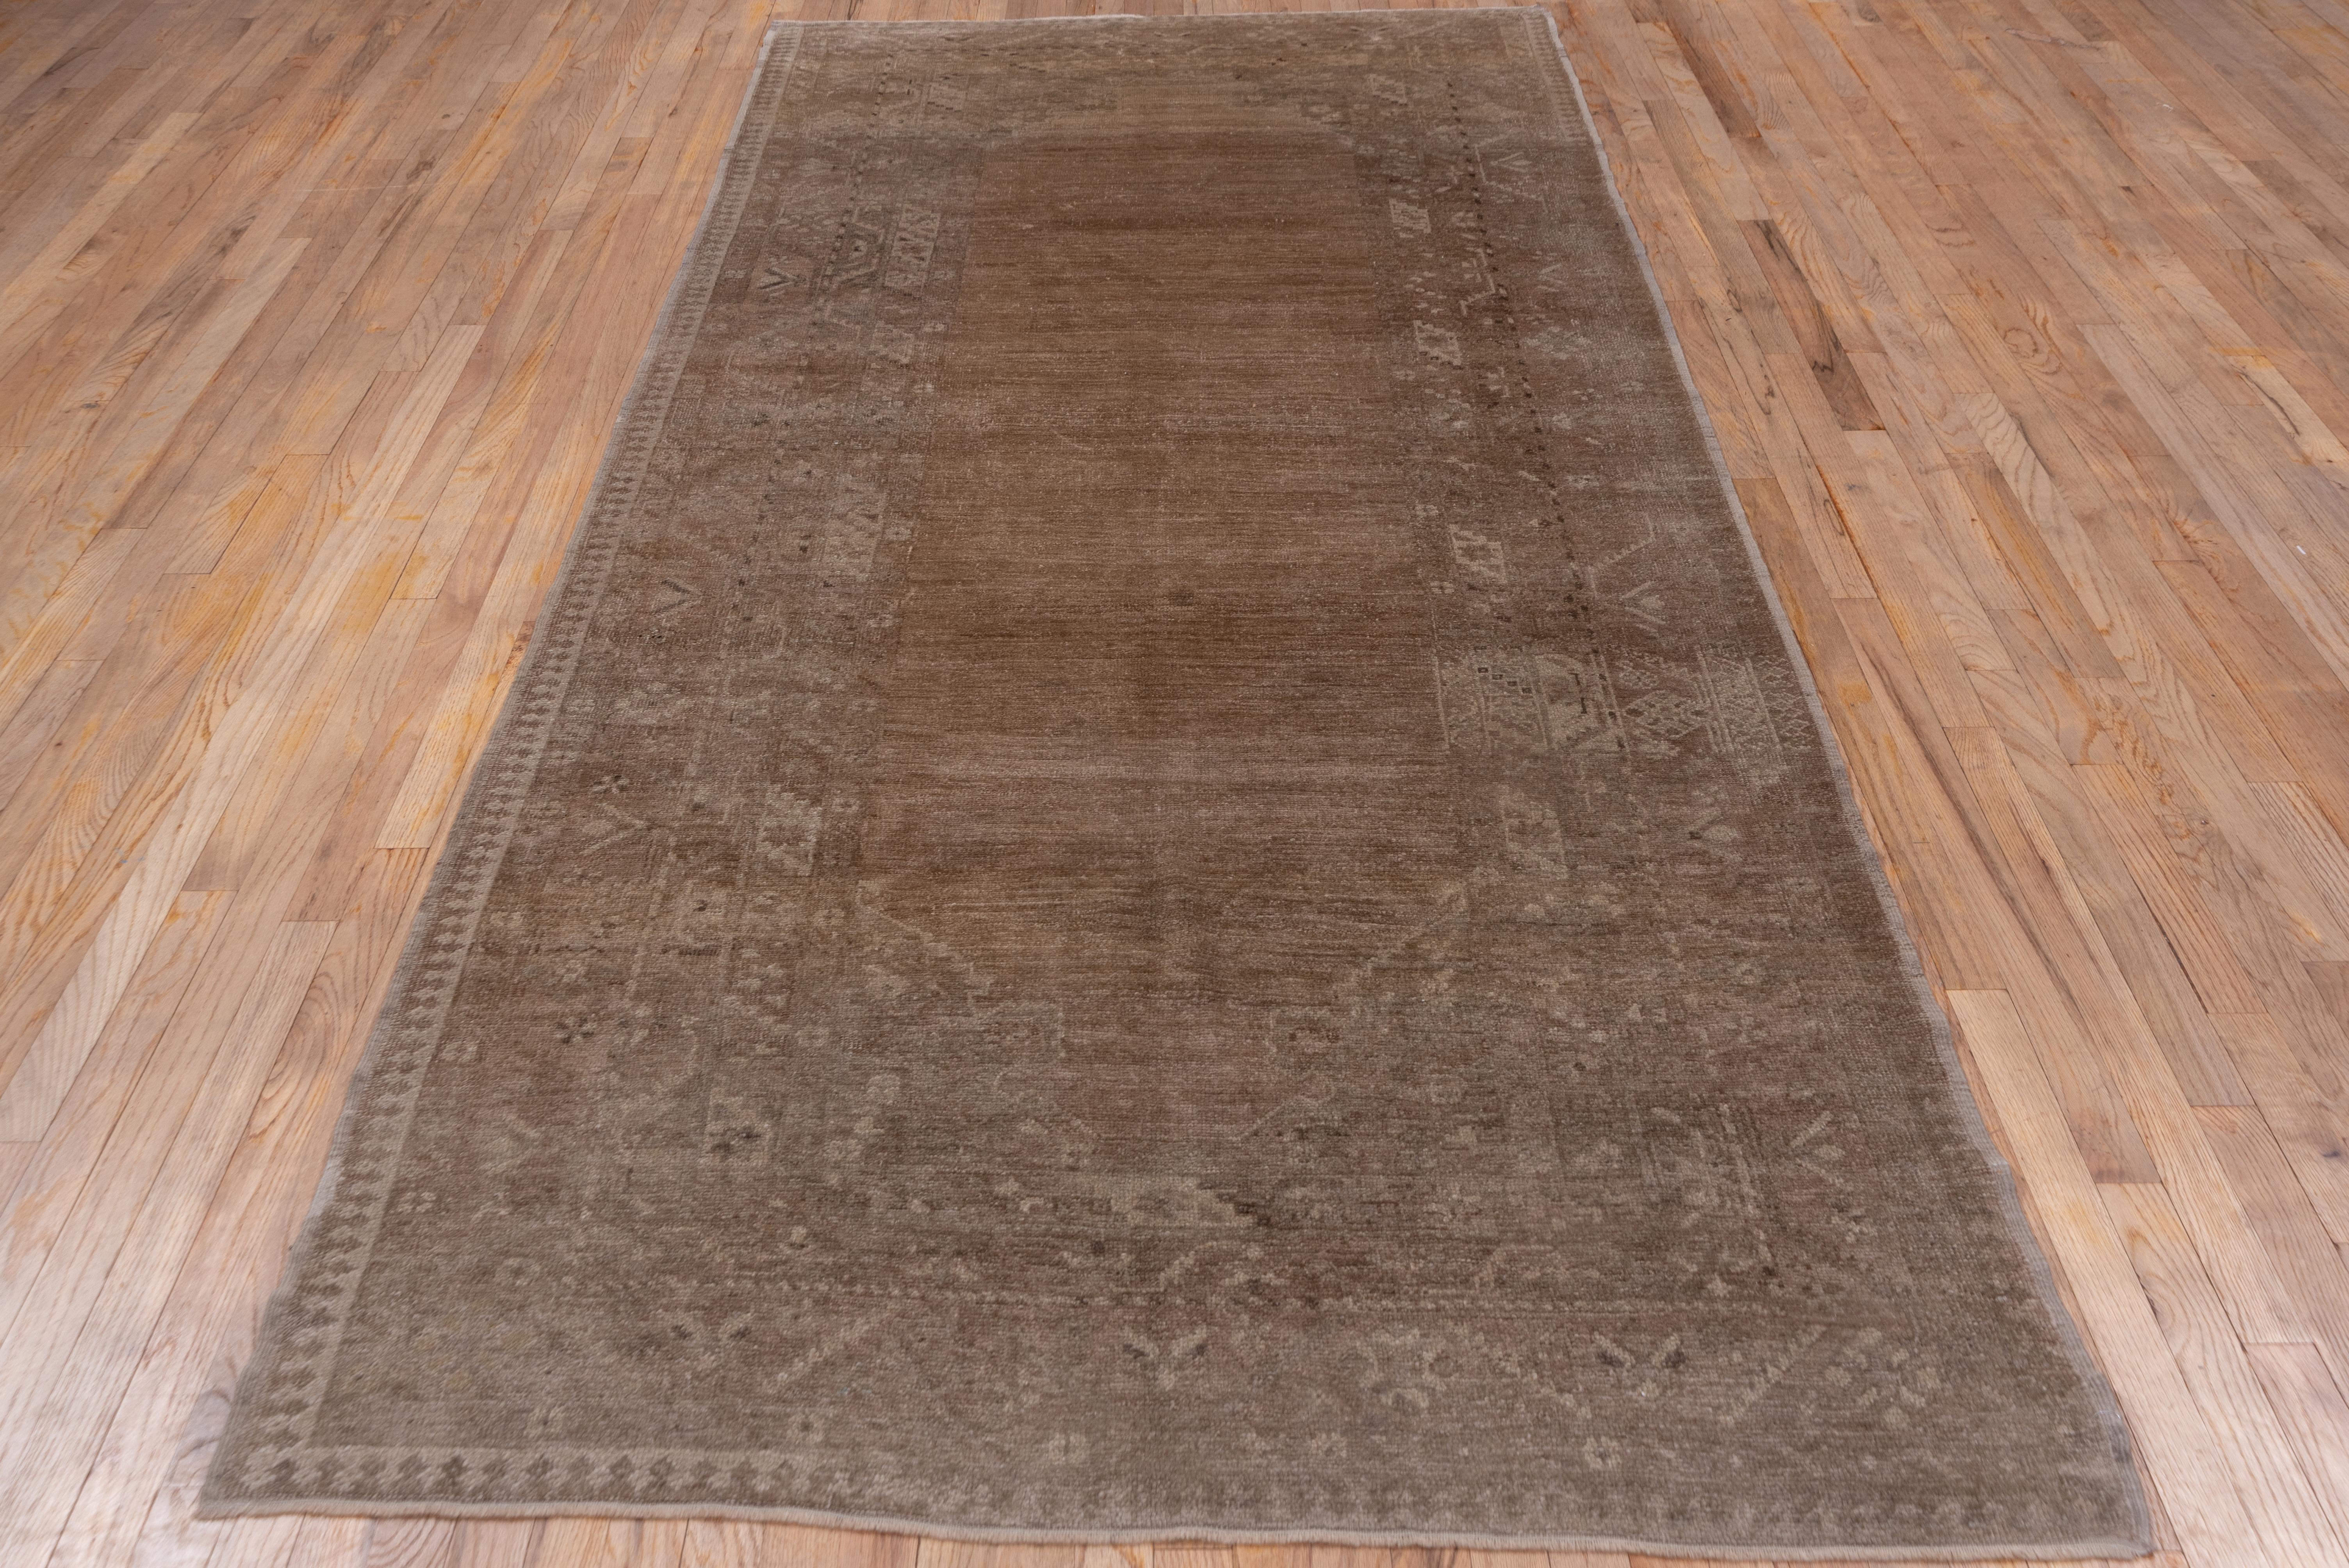 In tones of putty, beige, light brown and tan, this good condition western Turkish town rug shows a well abrashed field set within rosette and palmette corners and framed by a set of six patterned borders including keyhole reciprocal, rosette and